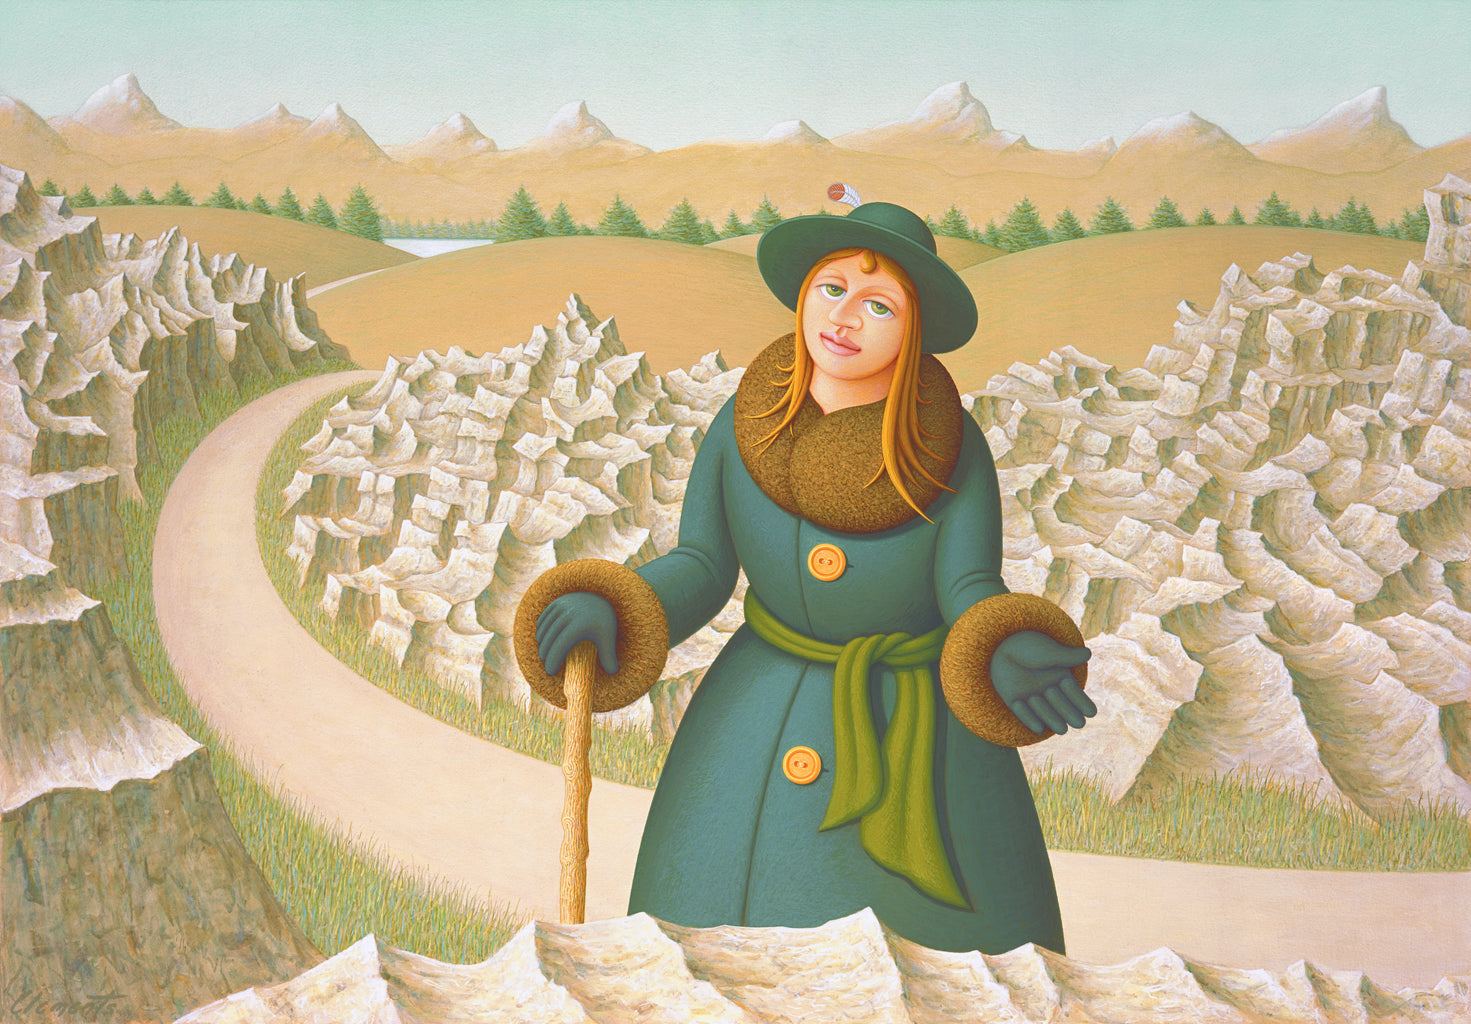 Imaginary Woman on Road with Cane and Rocks Painting Giclée Print